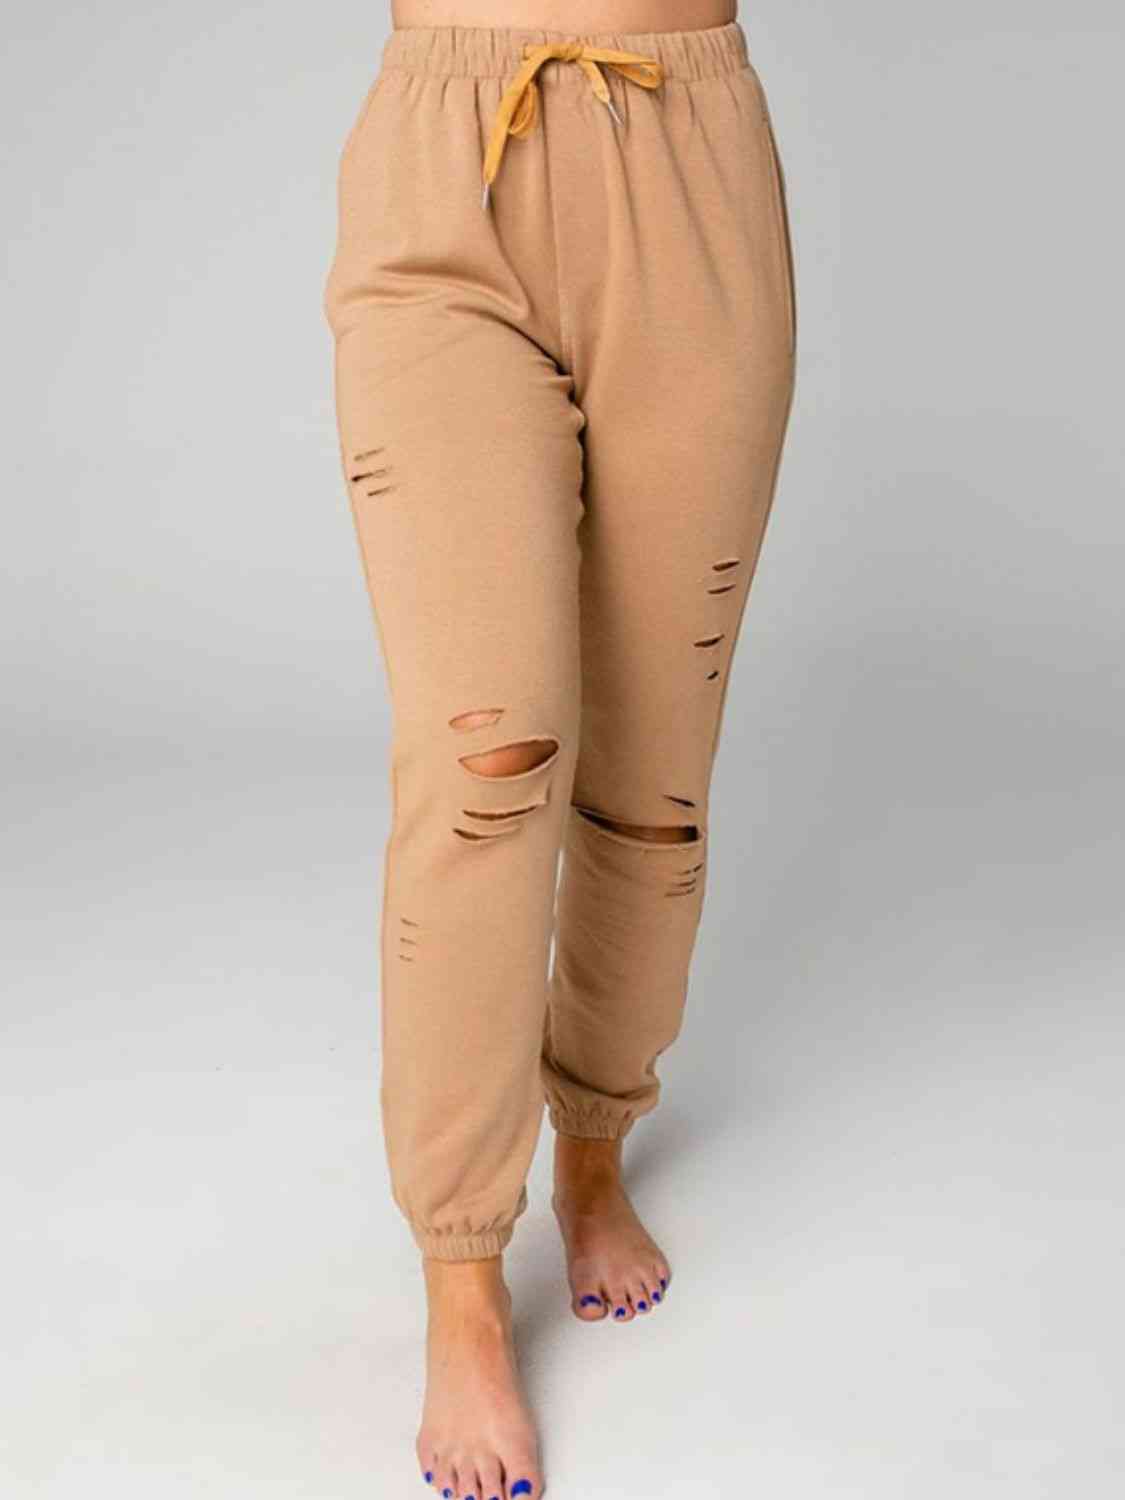 Tally Girl Distressed Sweatshirt and Joggers Set